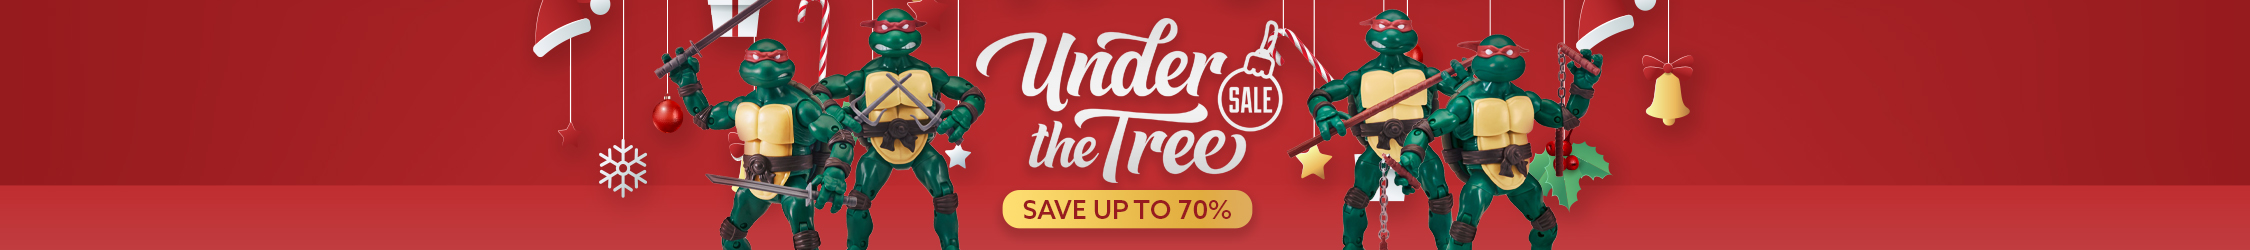 Under the Tree Sale 2021 Up to 70% Off